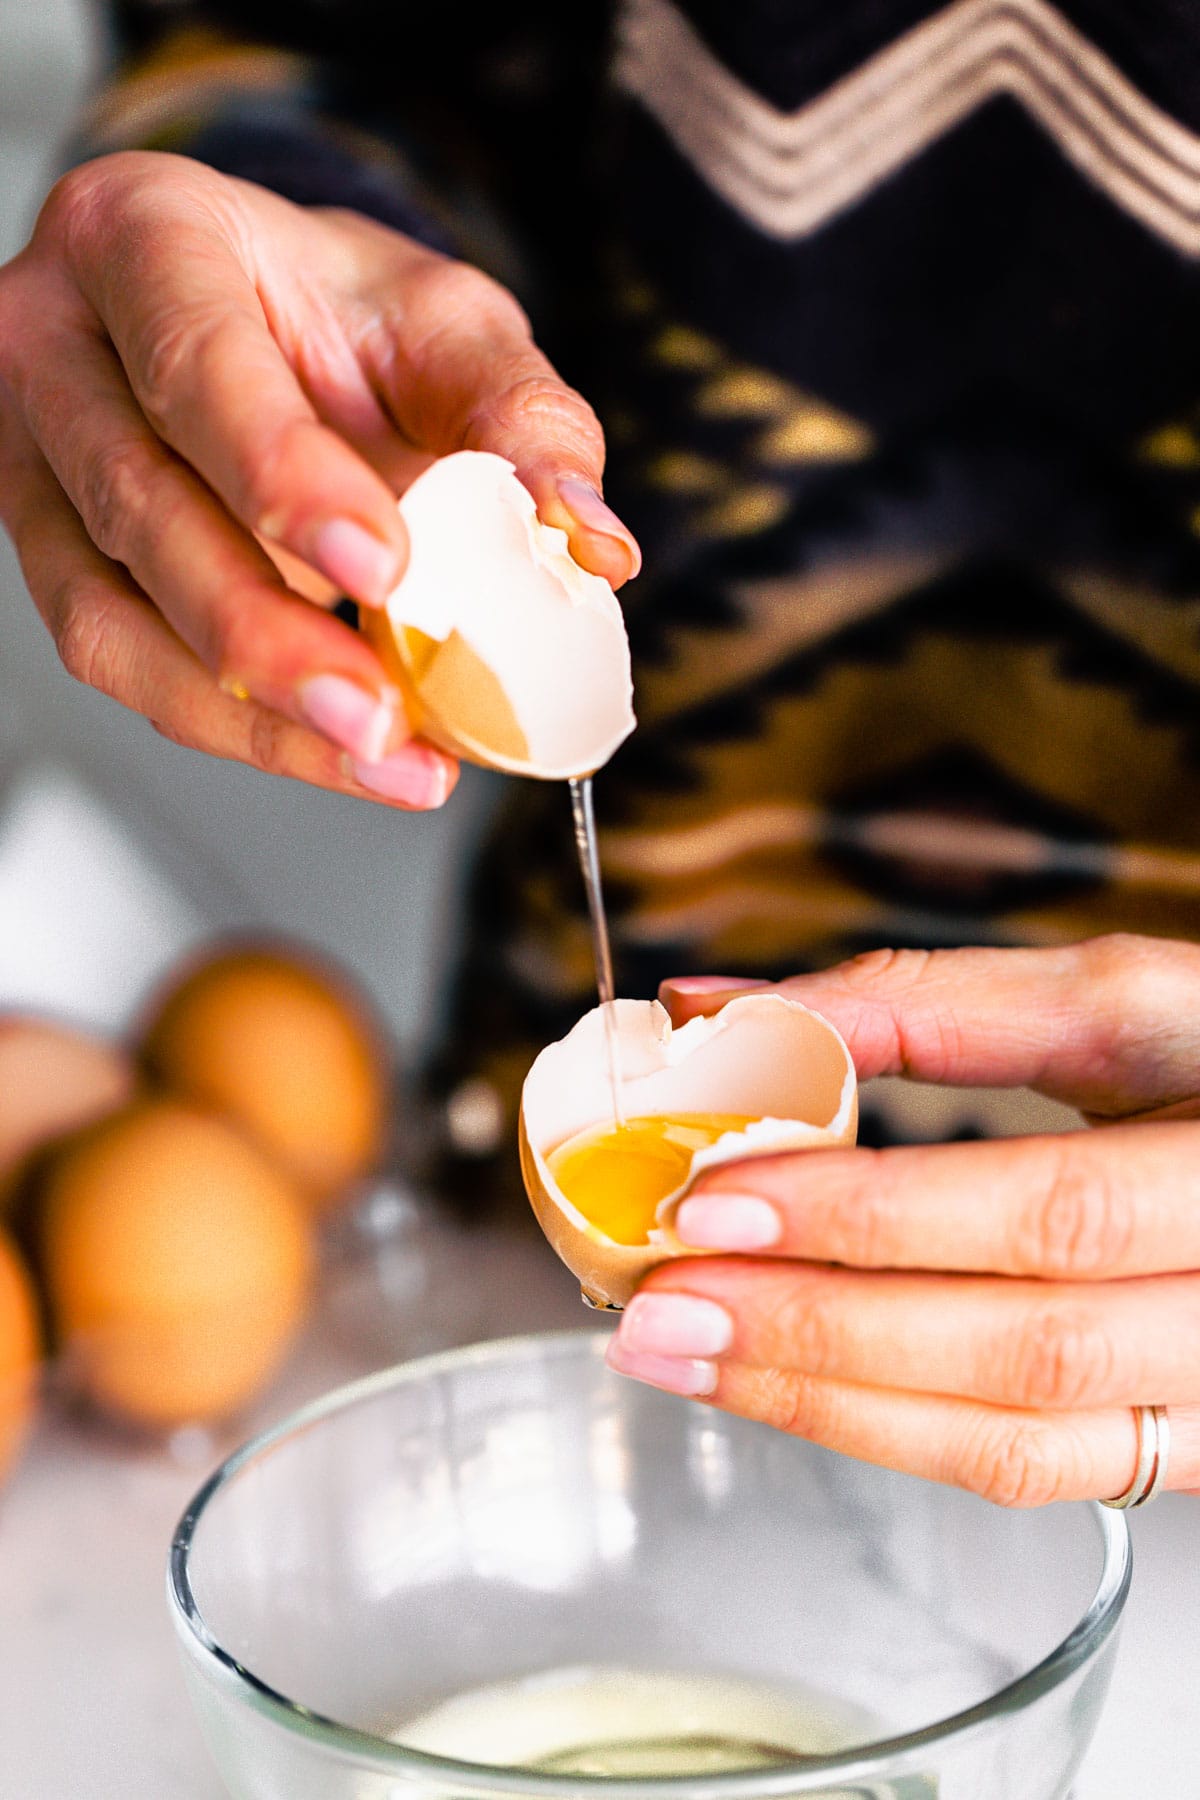 two hands holding egg a cracked egg over a glass bowl separating the yolk from the whites